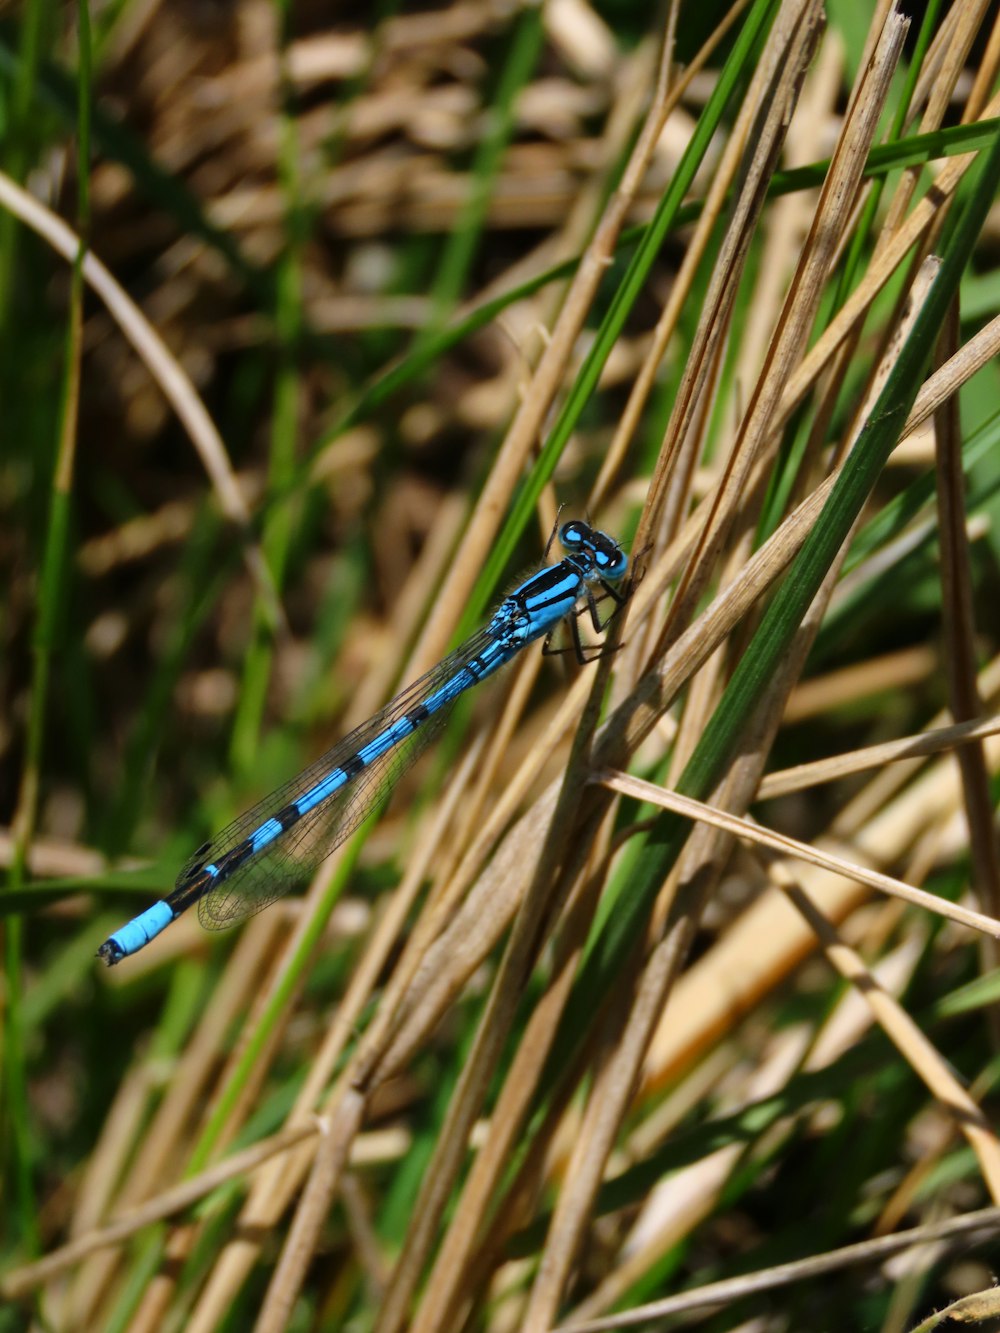 a blue and black dragonfly on grass